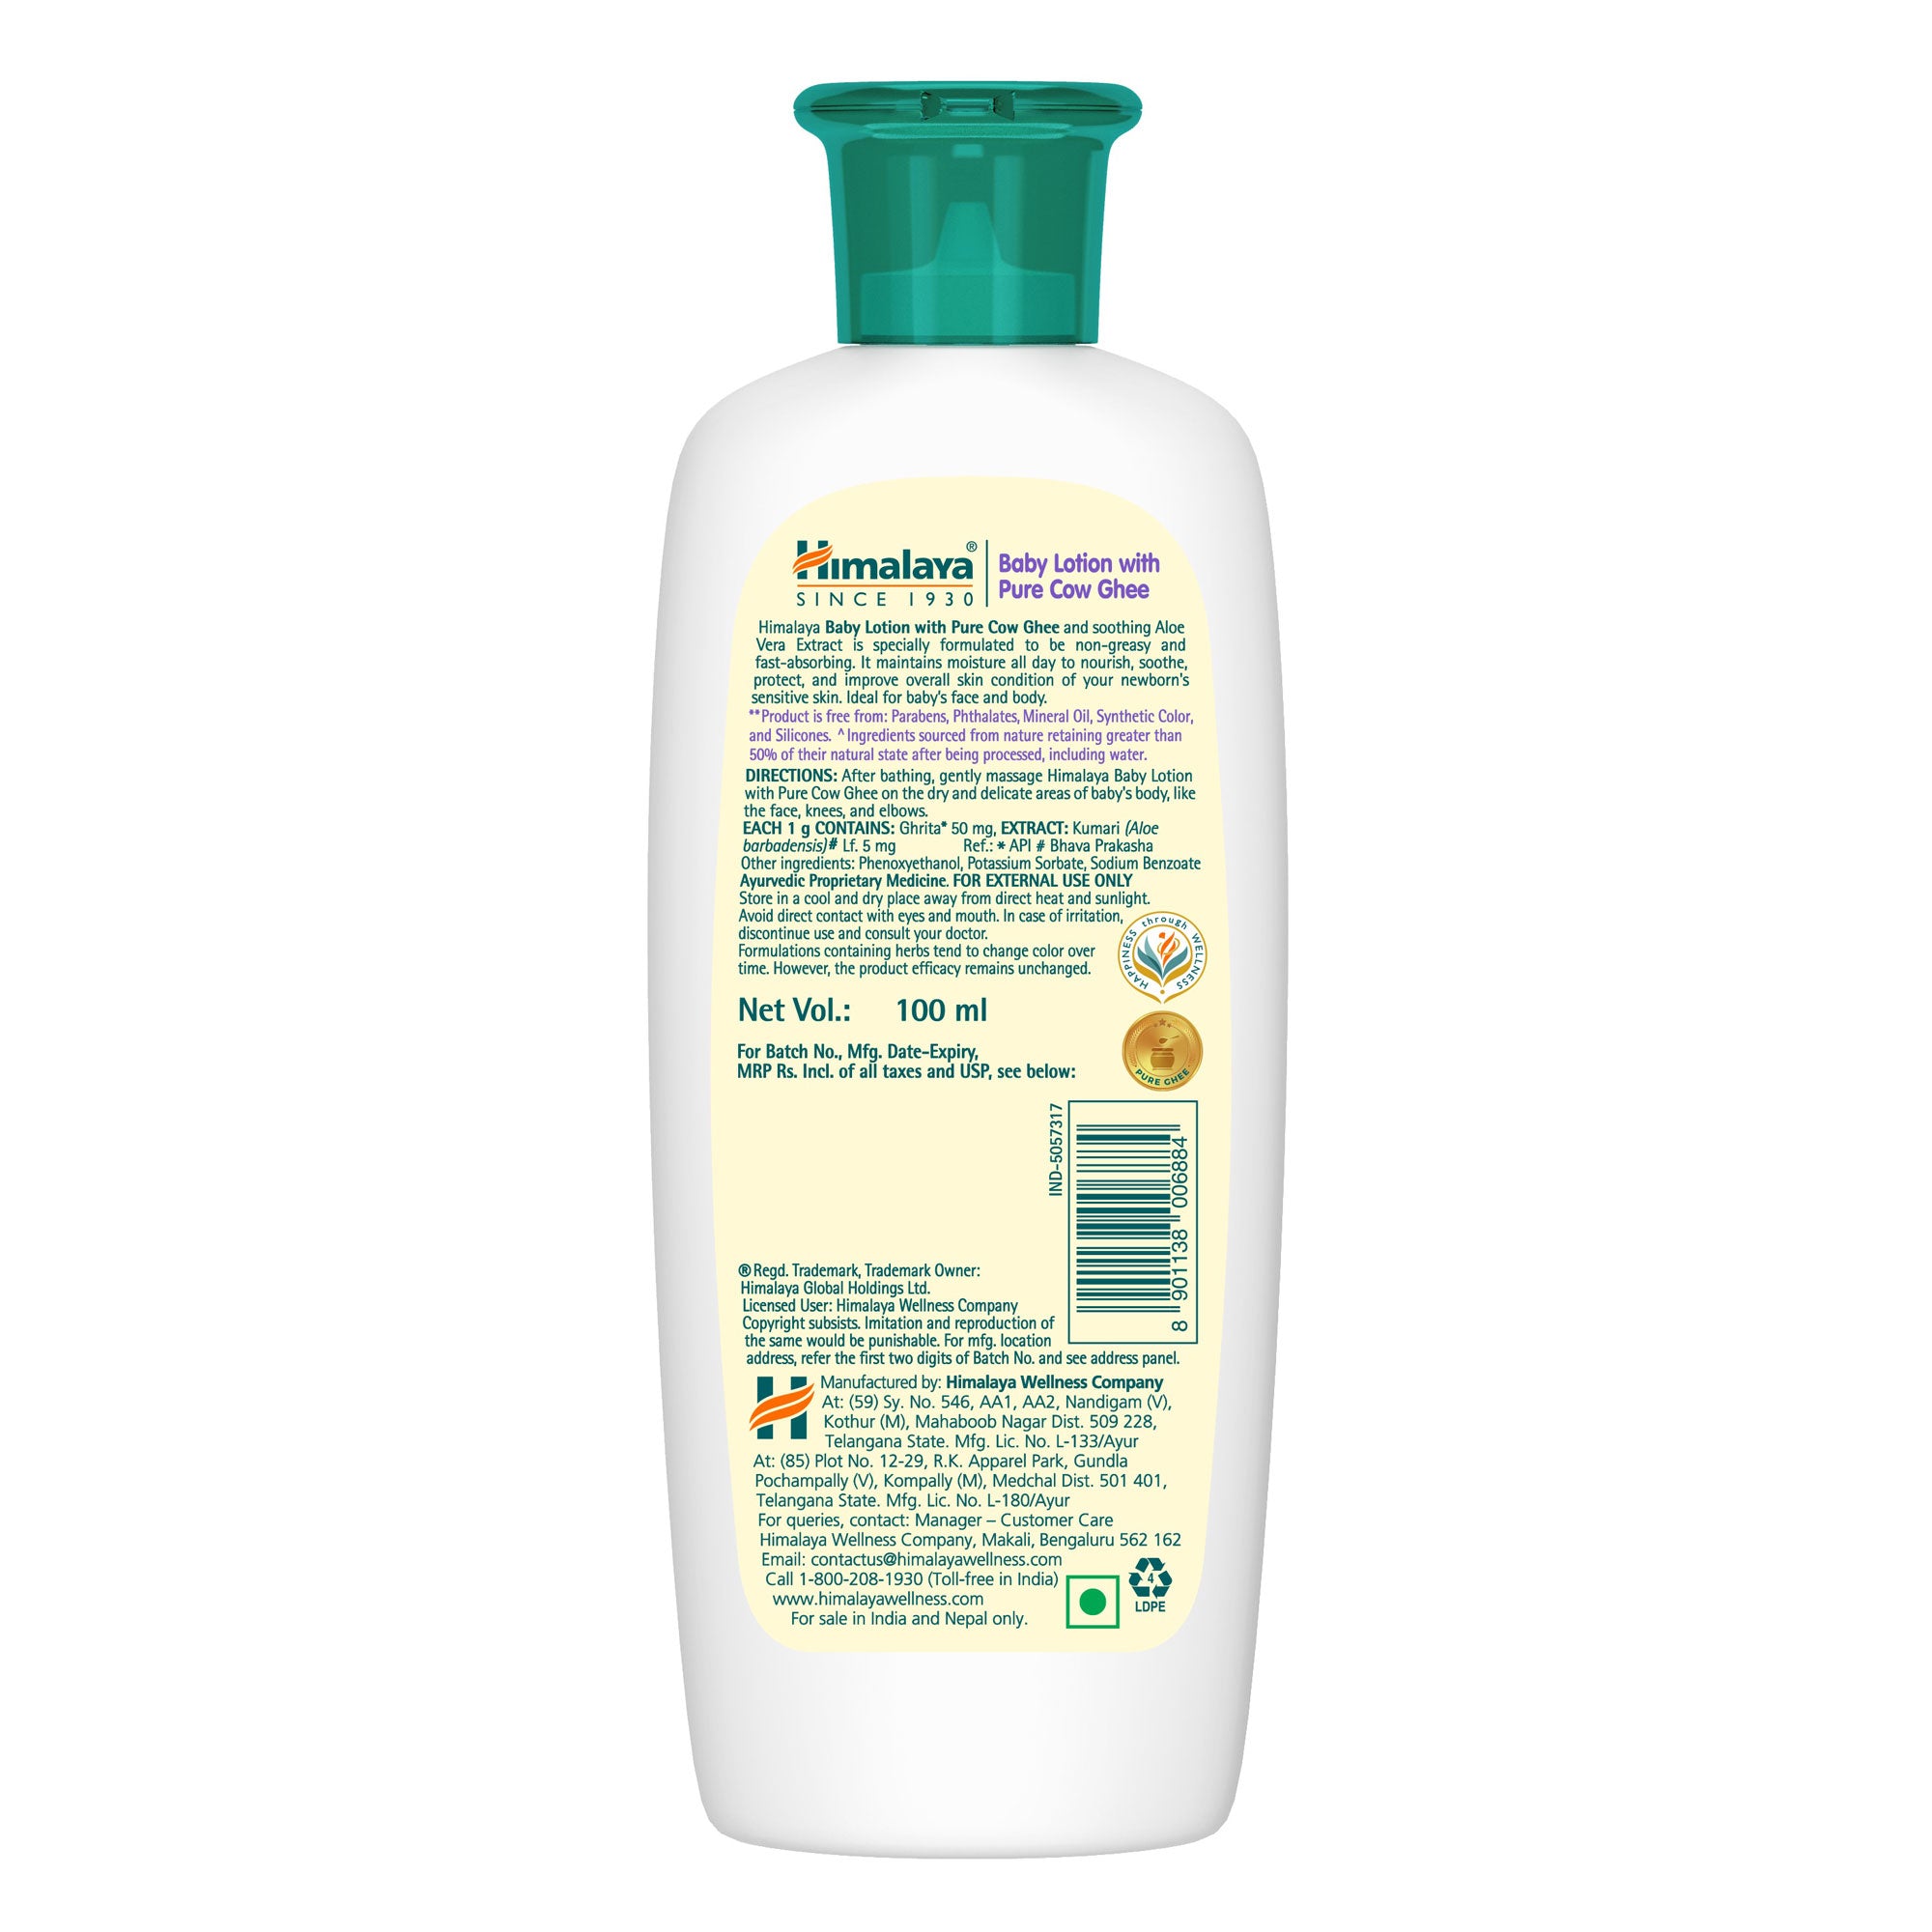 Himalaya Baby Lotion with Pure Cow Ghee 100ml Back